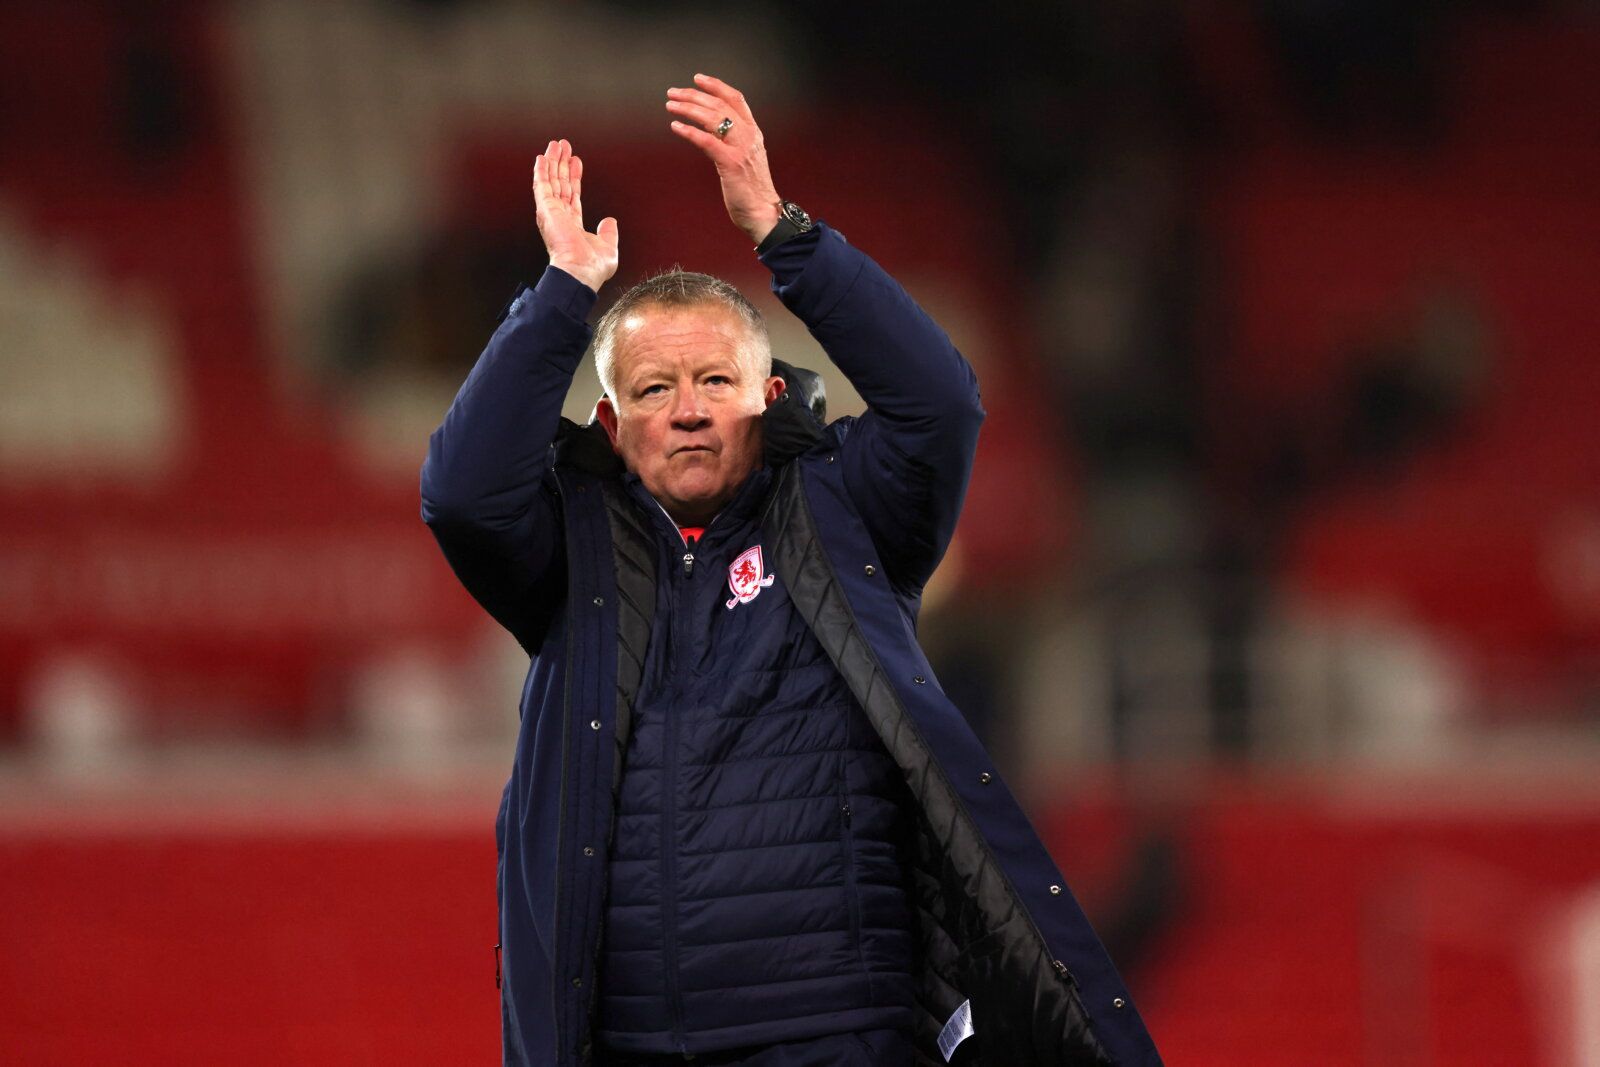 Soccer Football - Championship - Stoke City v Middlesbrough - bet365 Stadium, Stoke-on-Trent, Britain - December 11, 2021  Middlesbrough manager Chris Wilder applauds fans at the end of the match  Action Images/John Clifton  EDITORIAL USE ONLY. No use with unauthorized audio, video, data, fixture lists, club/league logos or 